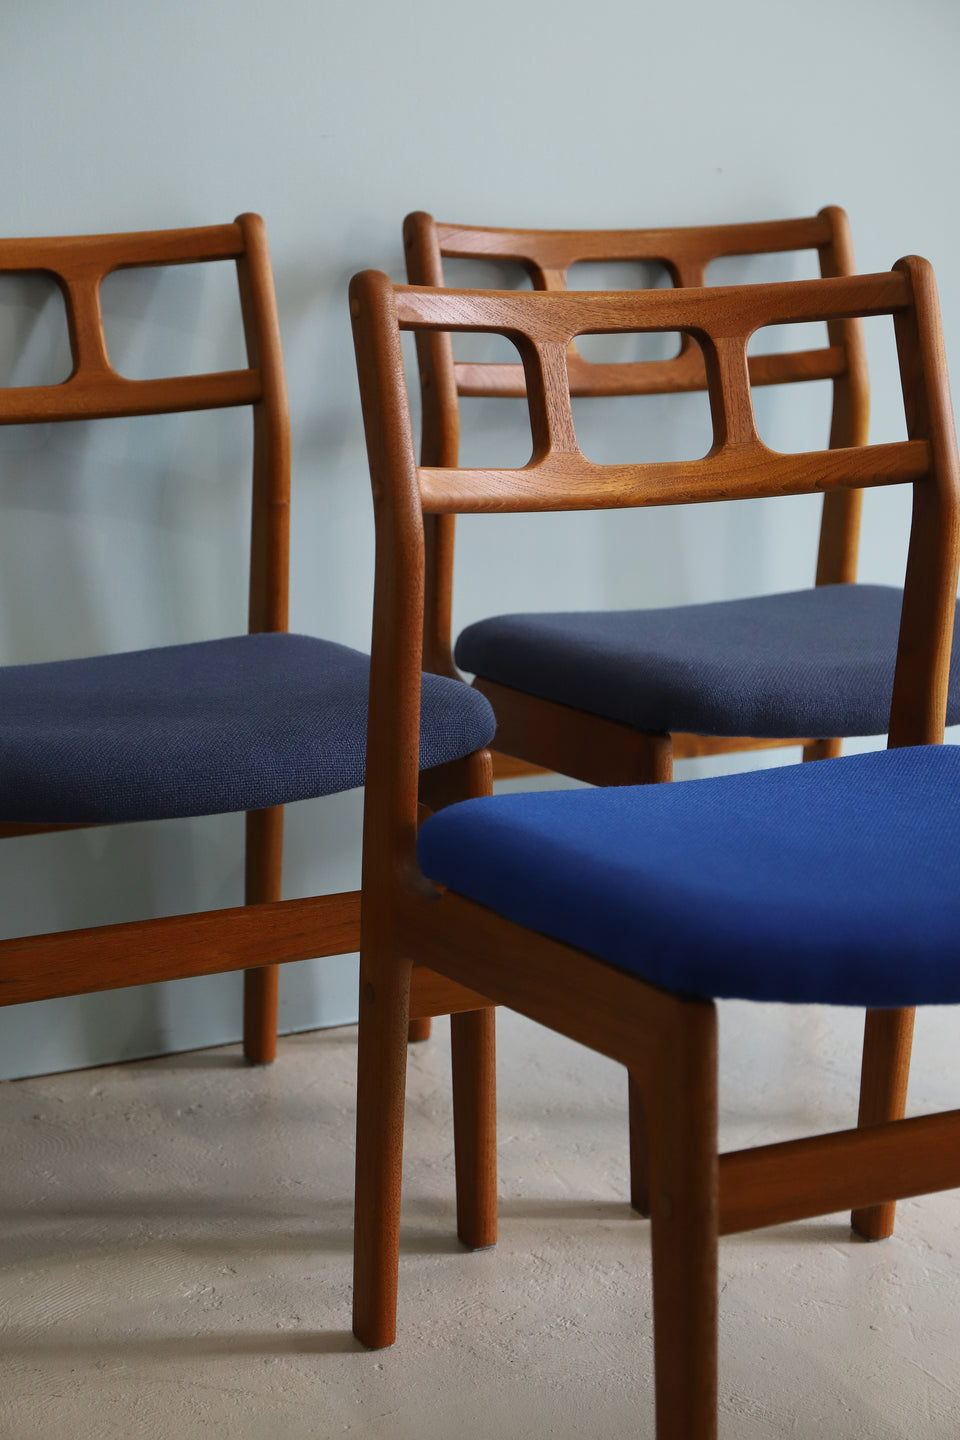 Vintage D-Scan Dining Chair Teakwood/D-スキャン ダイニングチェア チーク材 北欧デザイン ヴィンテージ